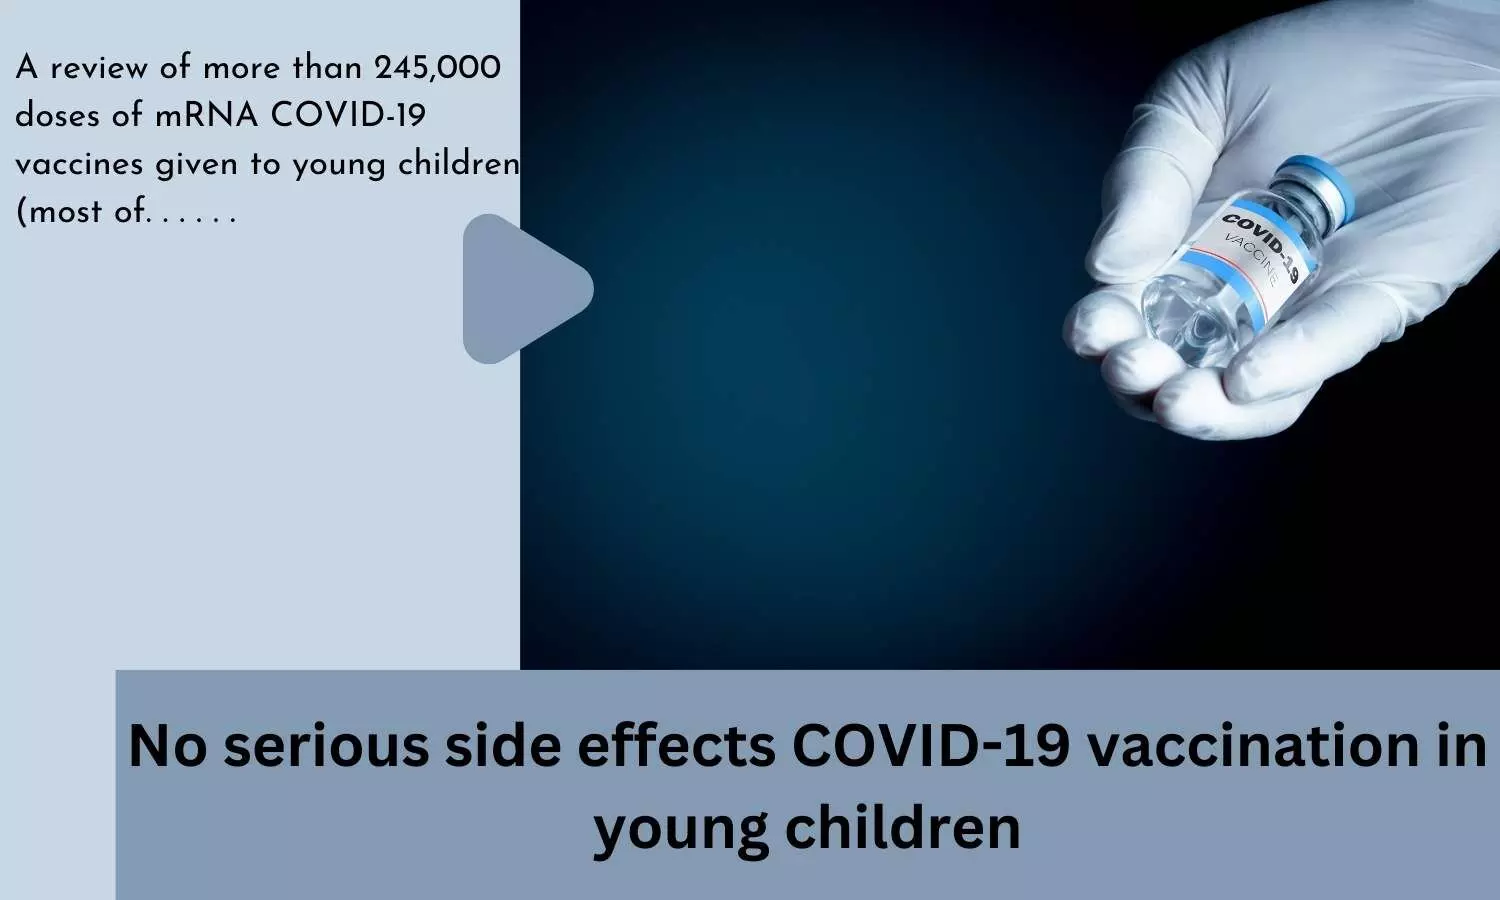 No serious side effects COVID-19 vaccination in young children